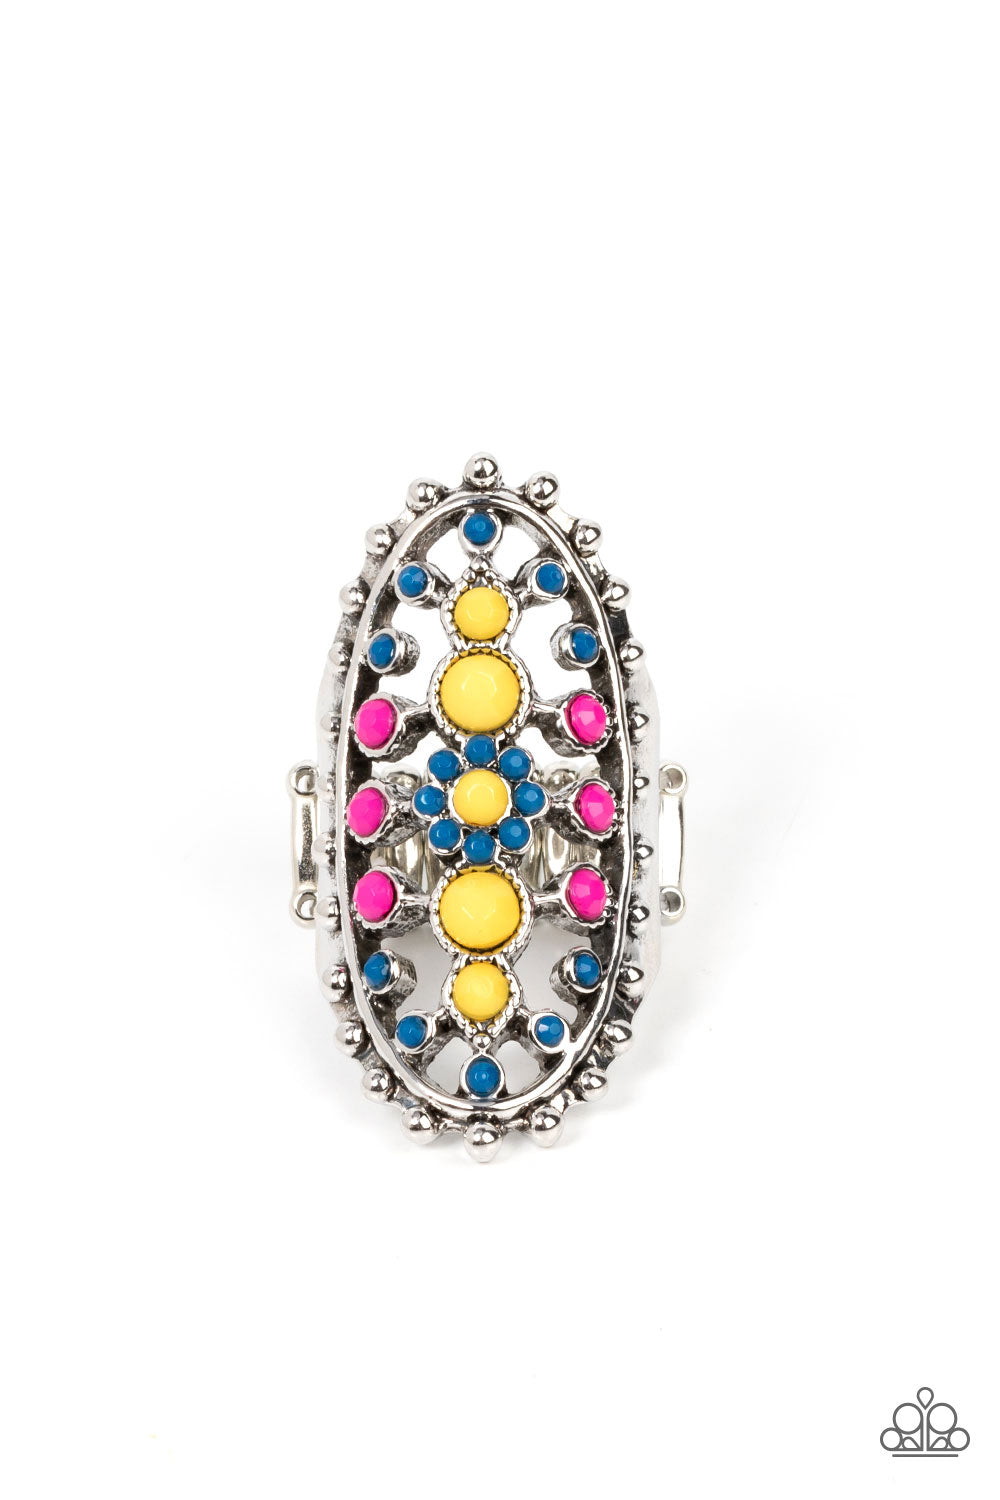 Sonoran Solstice - Blue Multi Color Ring - Paparazzi Accessories - Dainty Illuminating, Mykonos Blue, and Fuchsia Fedora beads dot the airy front of a studded silver oval frame, creating a colorful floral pattern across the finger. Features a stretchy band for a flexible fit. Sold as one individual ring.